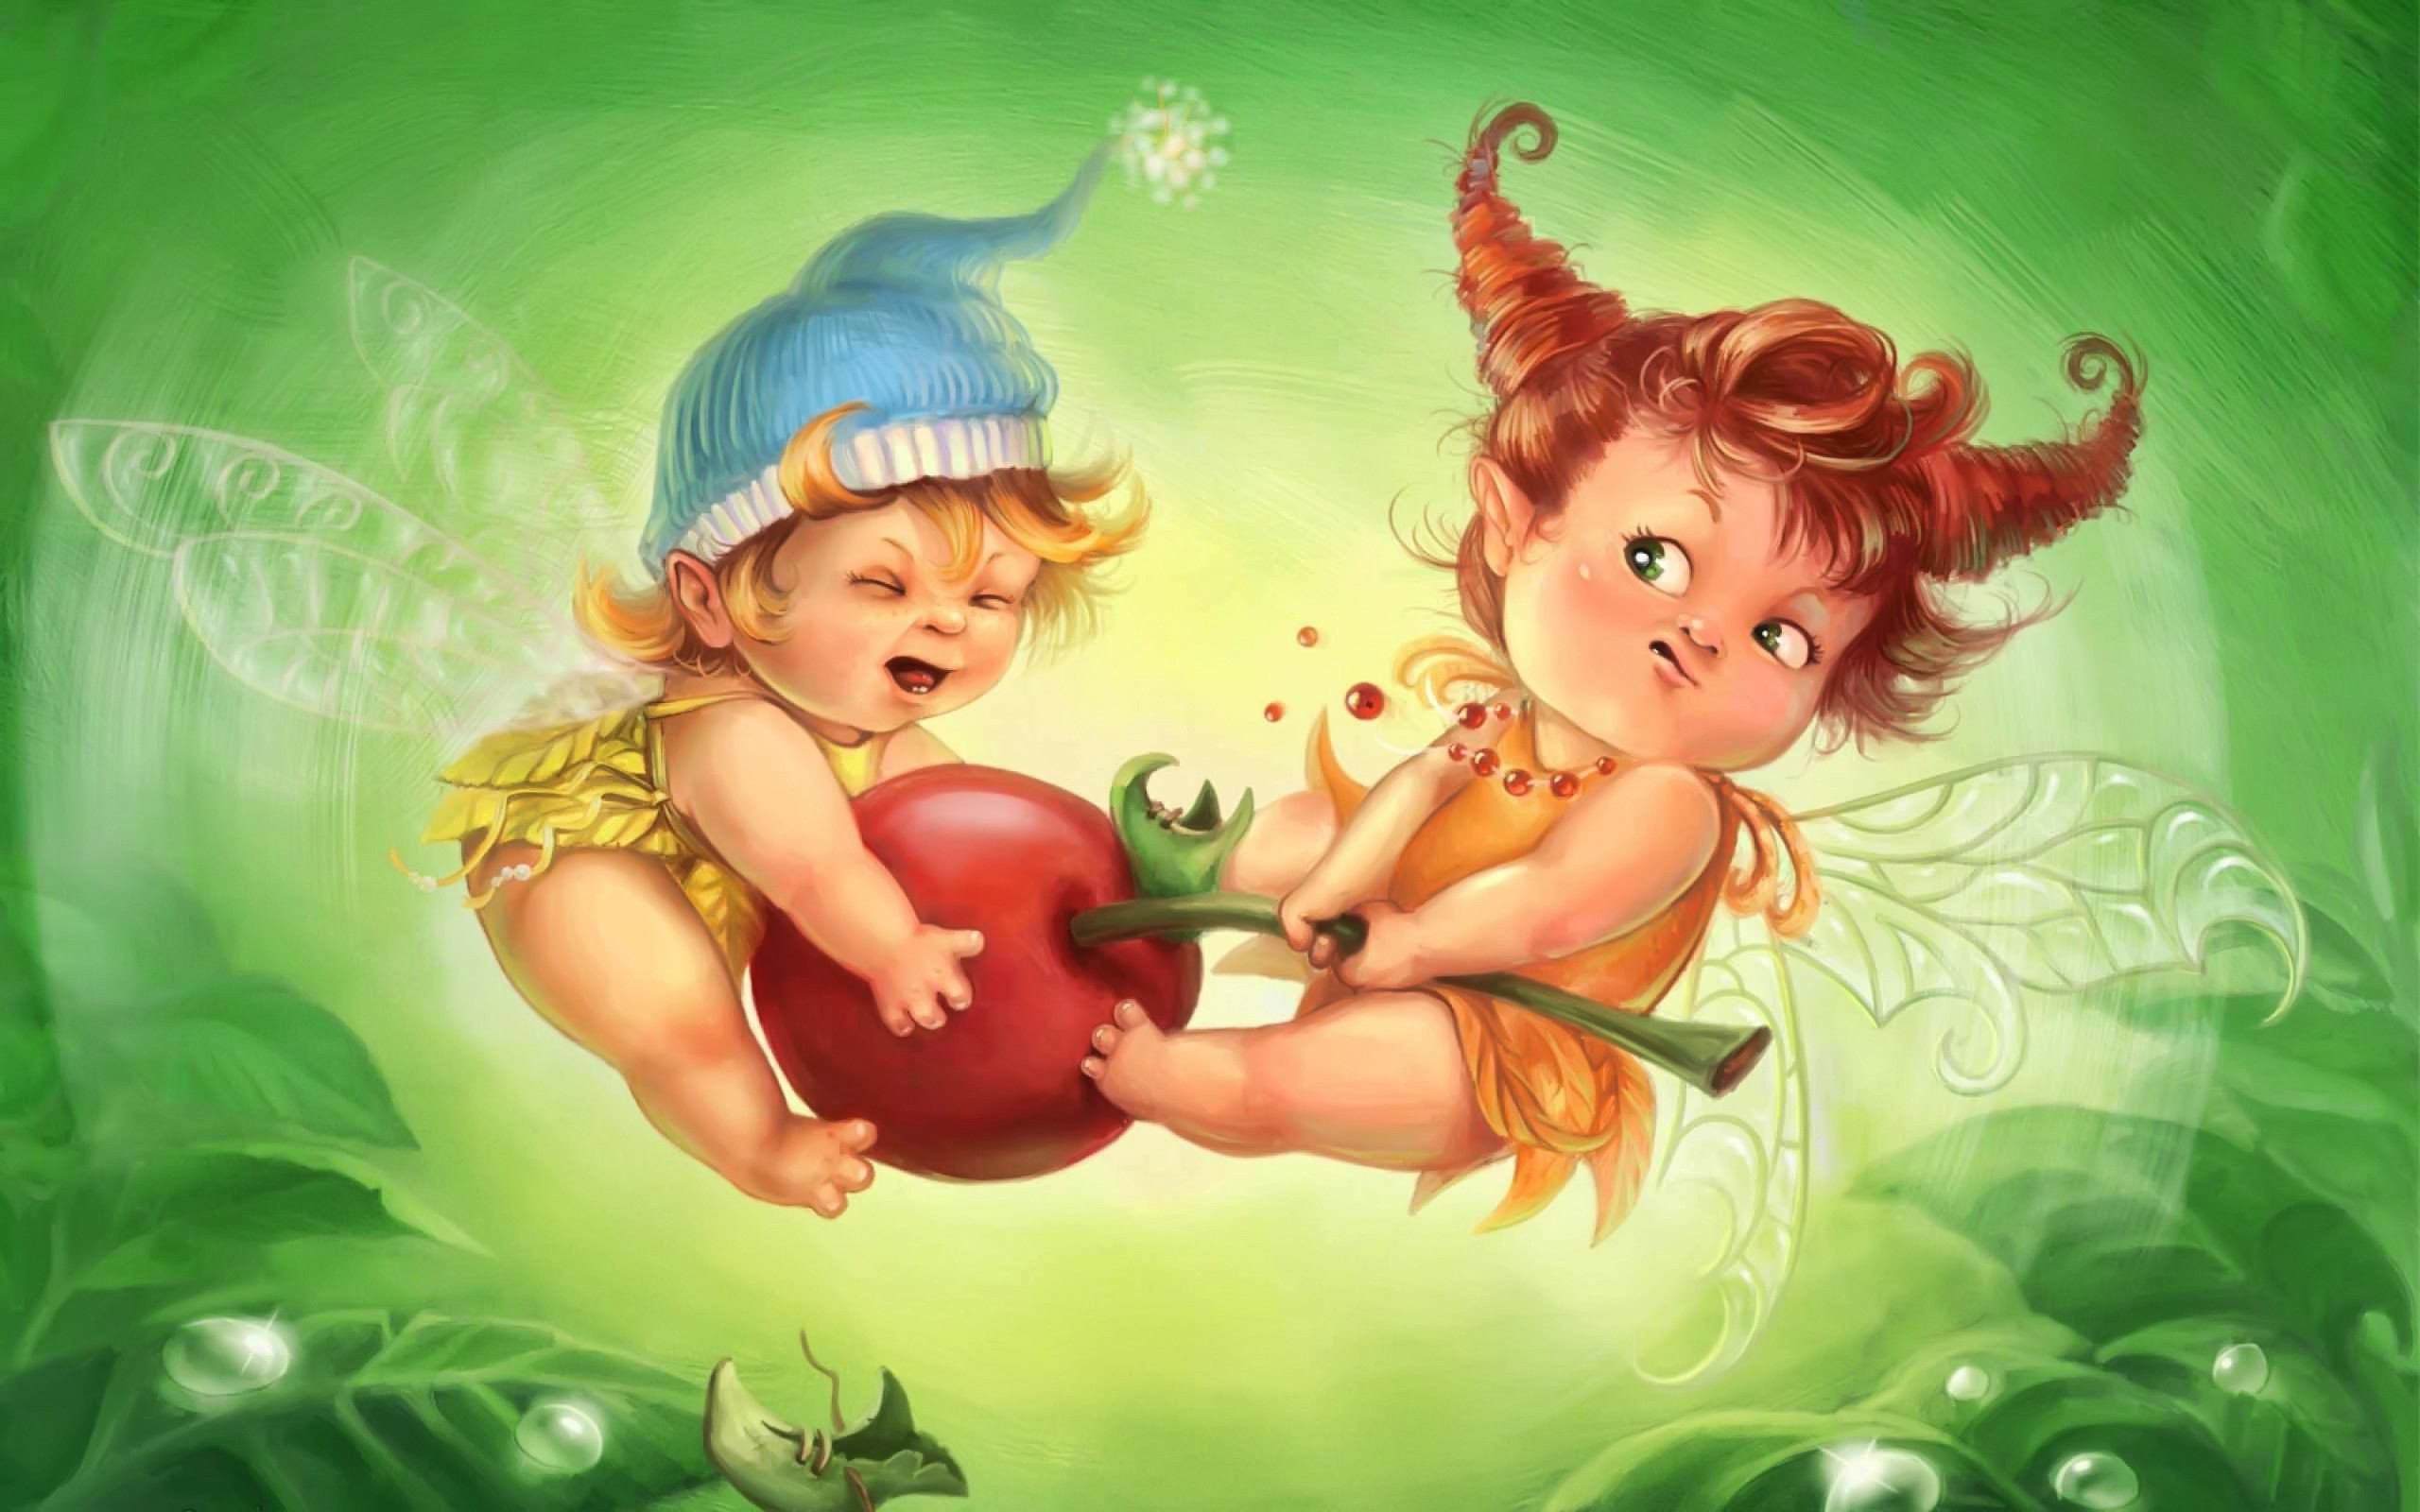 Wallpaper Baby Angels (50+ images)